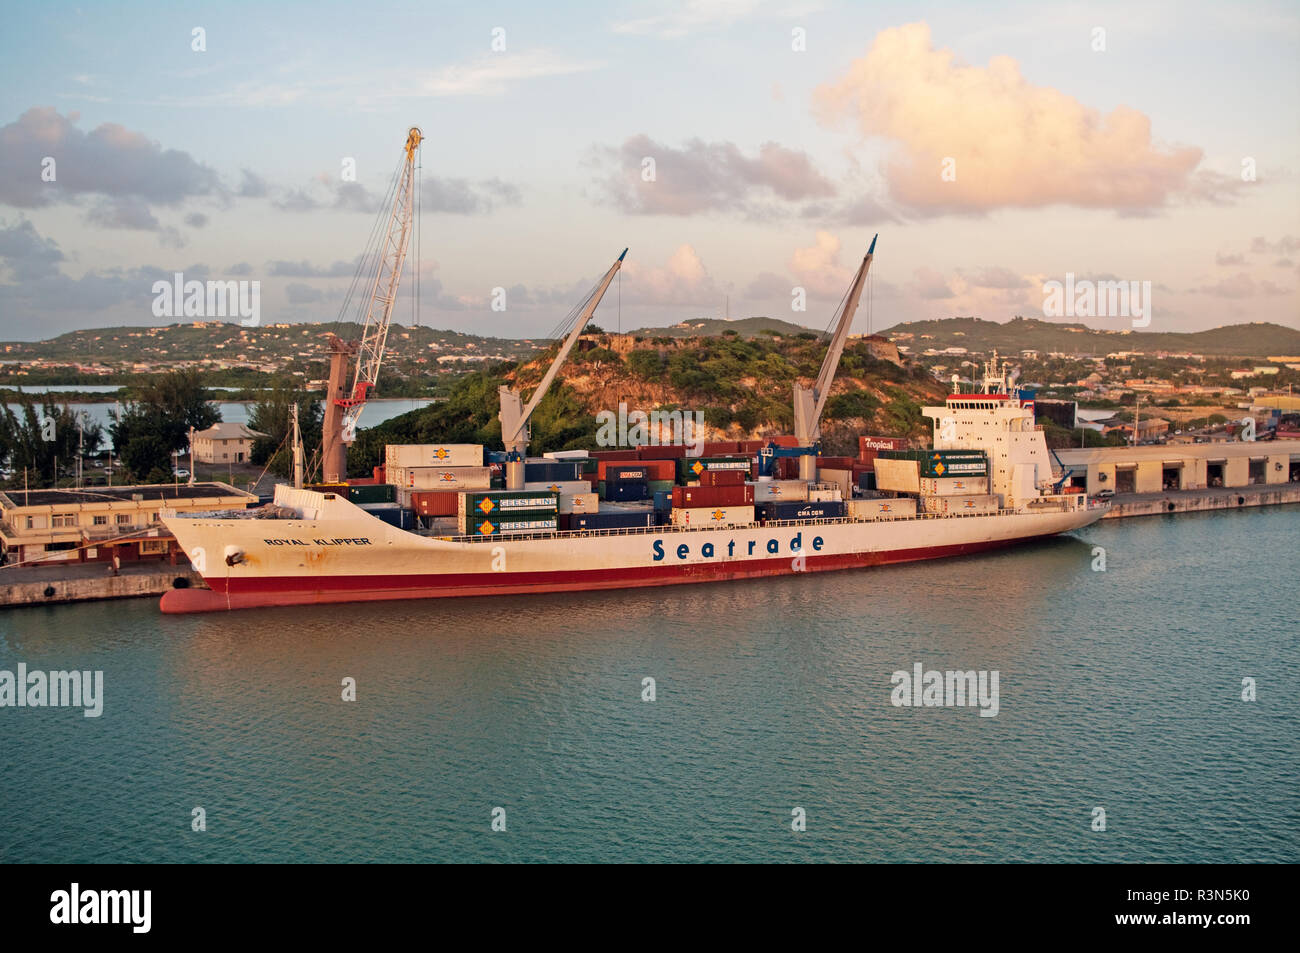 Antigua, St Johns, Caribbean, Container Ship in Dock Stock Photo